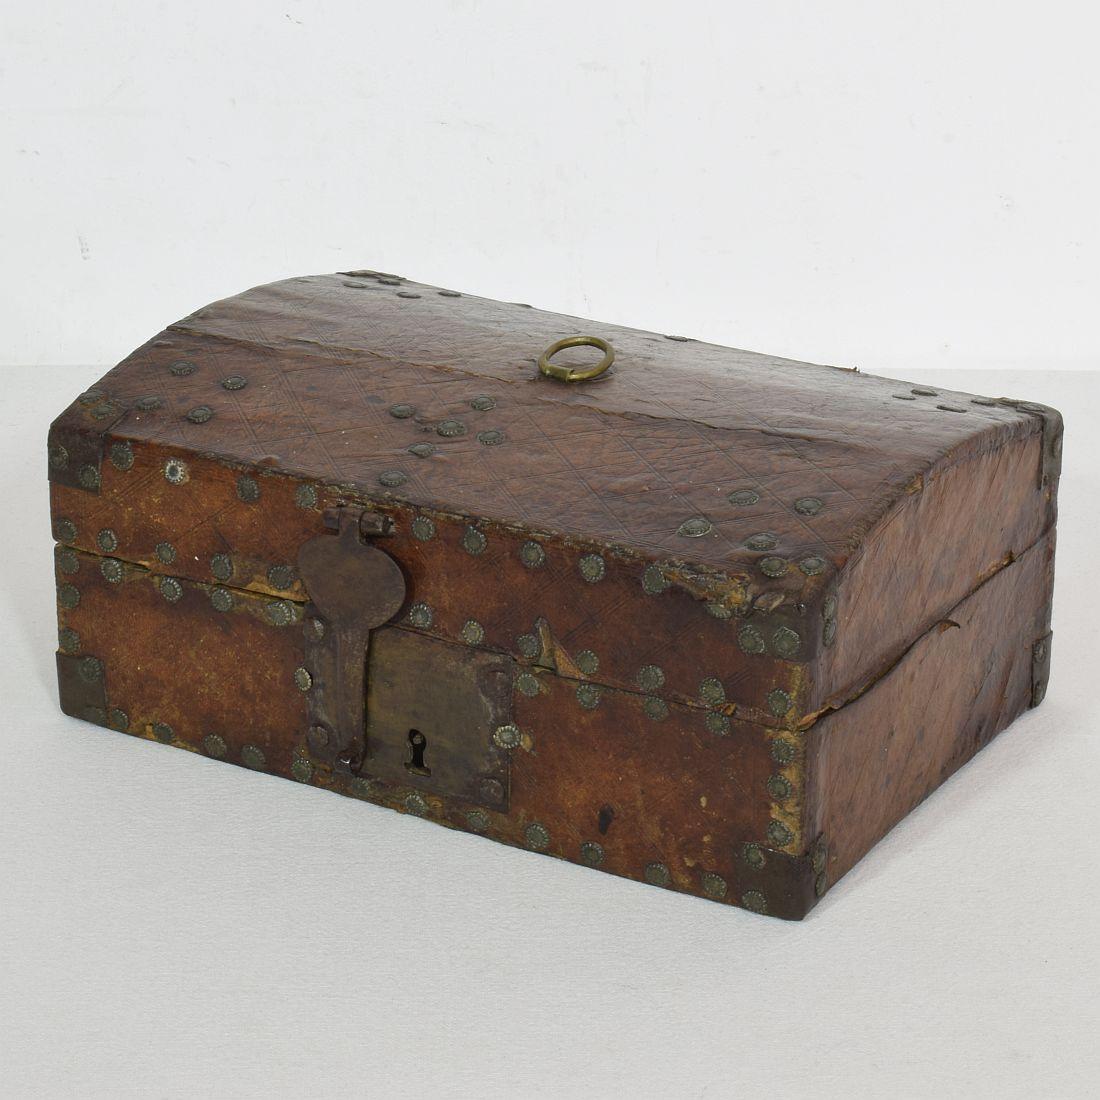 Extremely old box that is covered with leather and metal decorations. 
Rare find.
France, circa 1600-1700
Weathered and some losses.